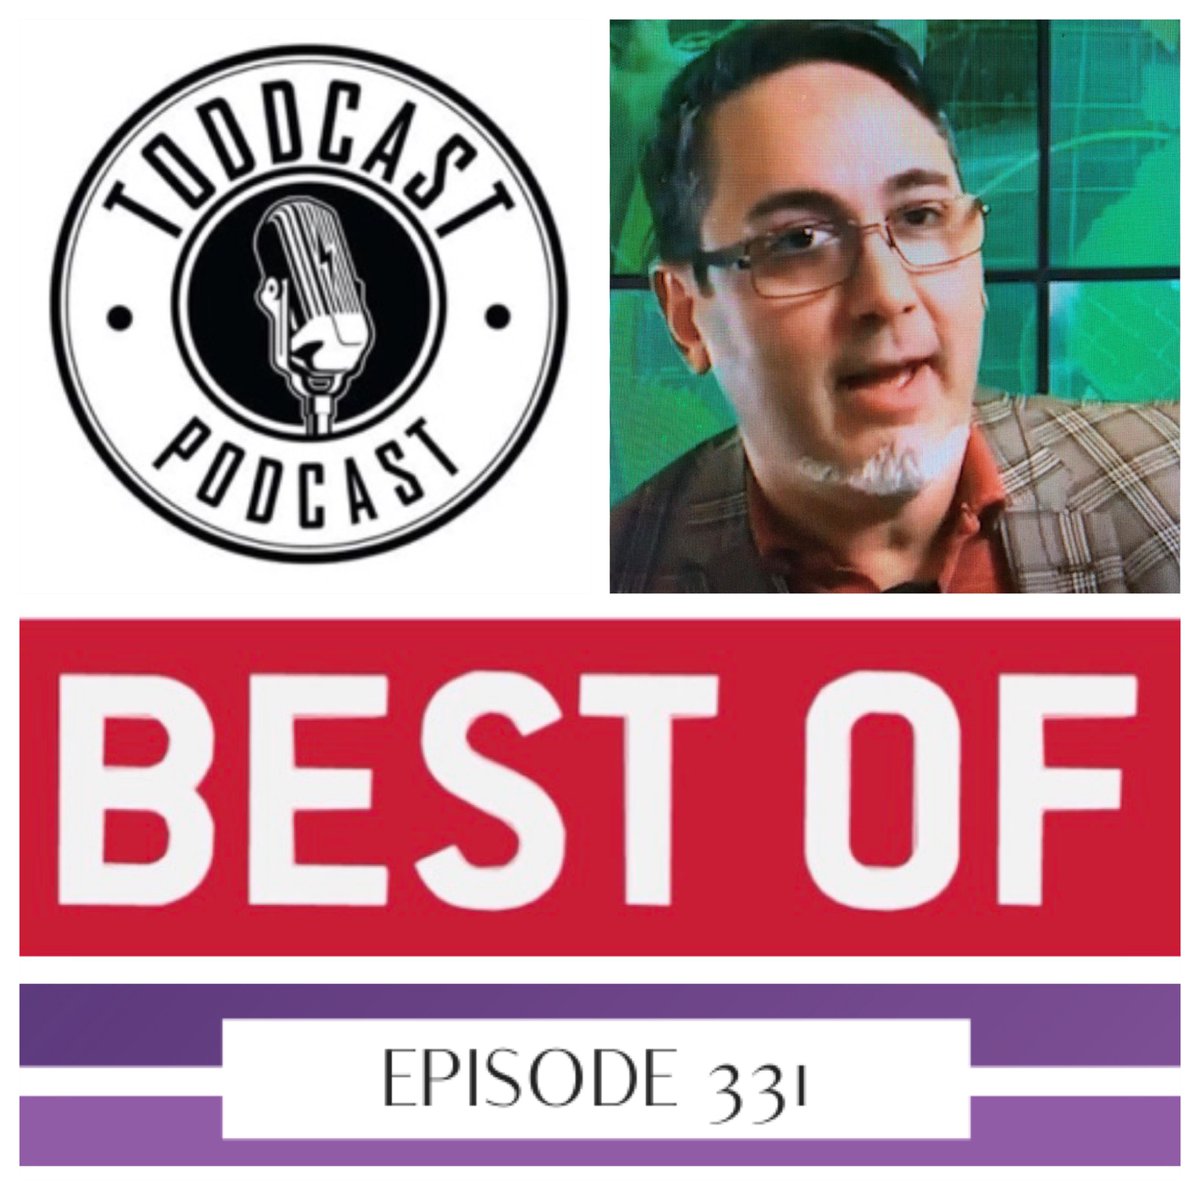 “Years ago, the GOAT was a negative thing, you were either the hero or the GOAT…” #MMAPowerHour host @ColinCrandall33 talks about the GOATS of #MMA for men AND women in our #BestOf #podcast ep.331! ecs.page.link/msKU9